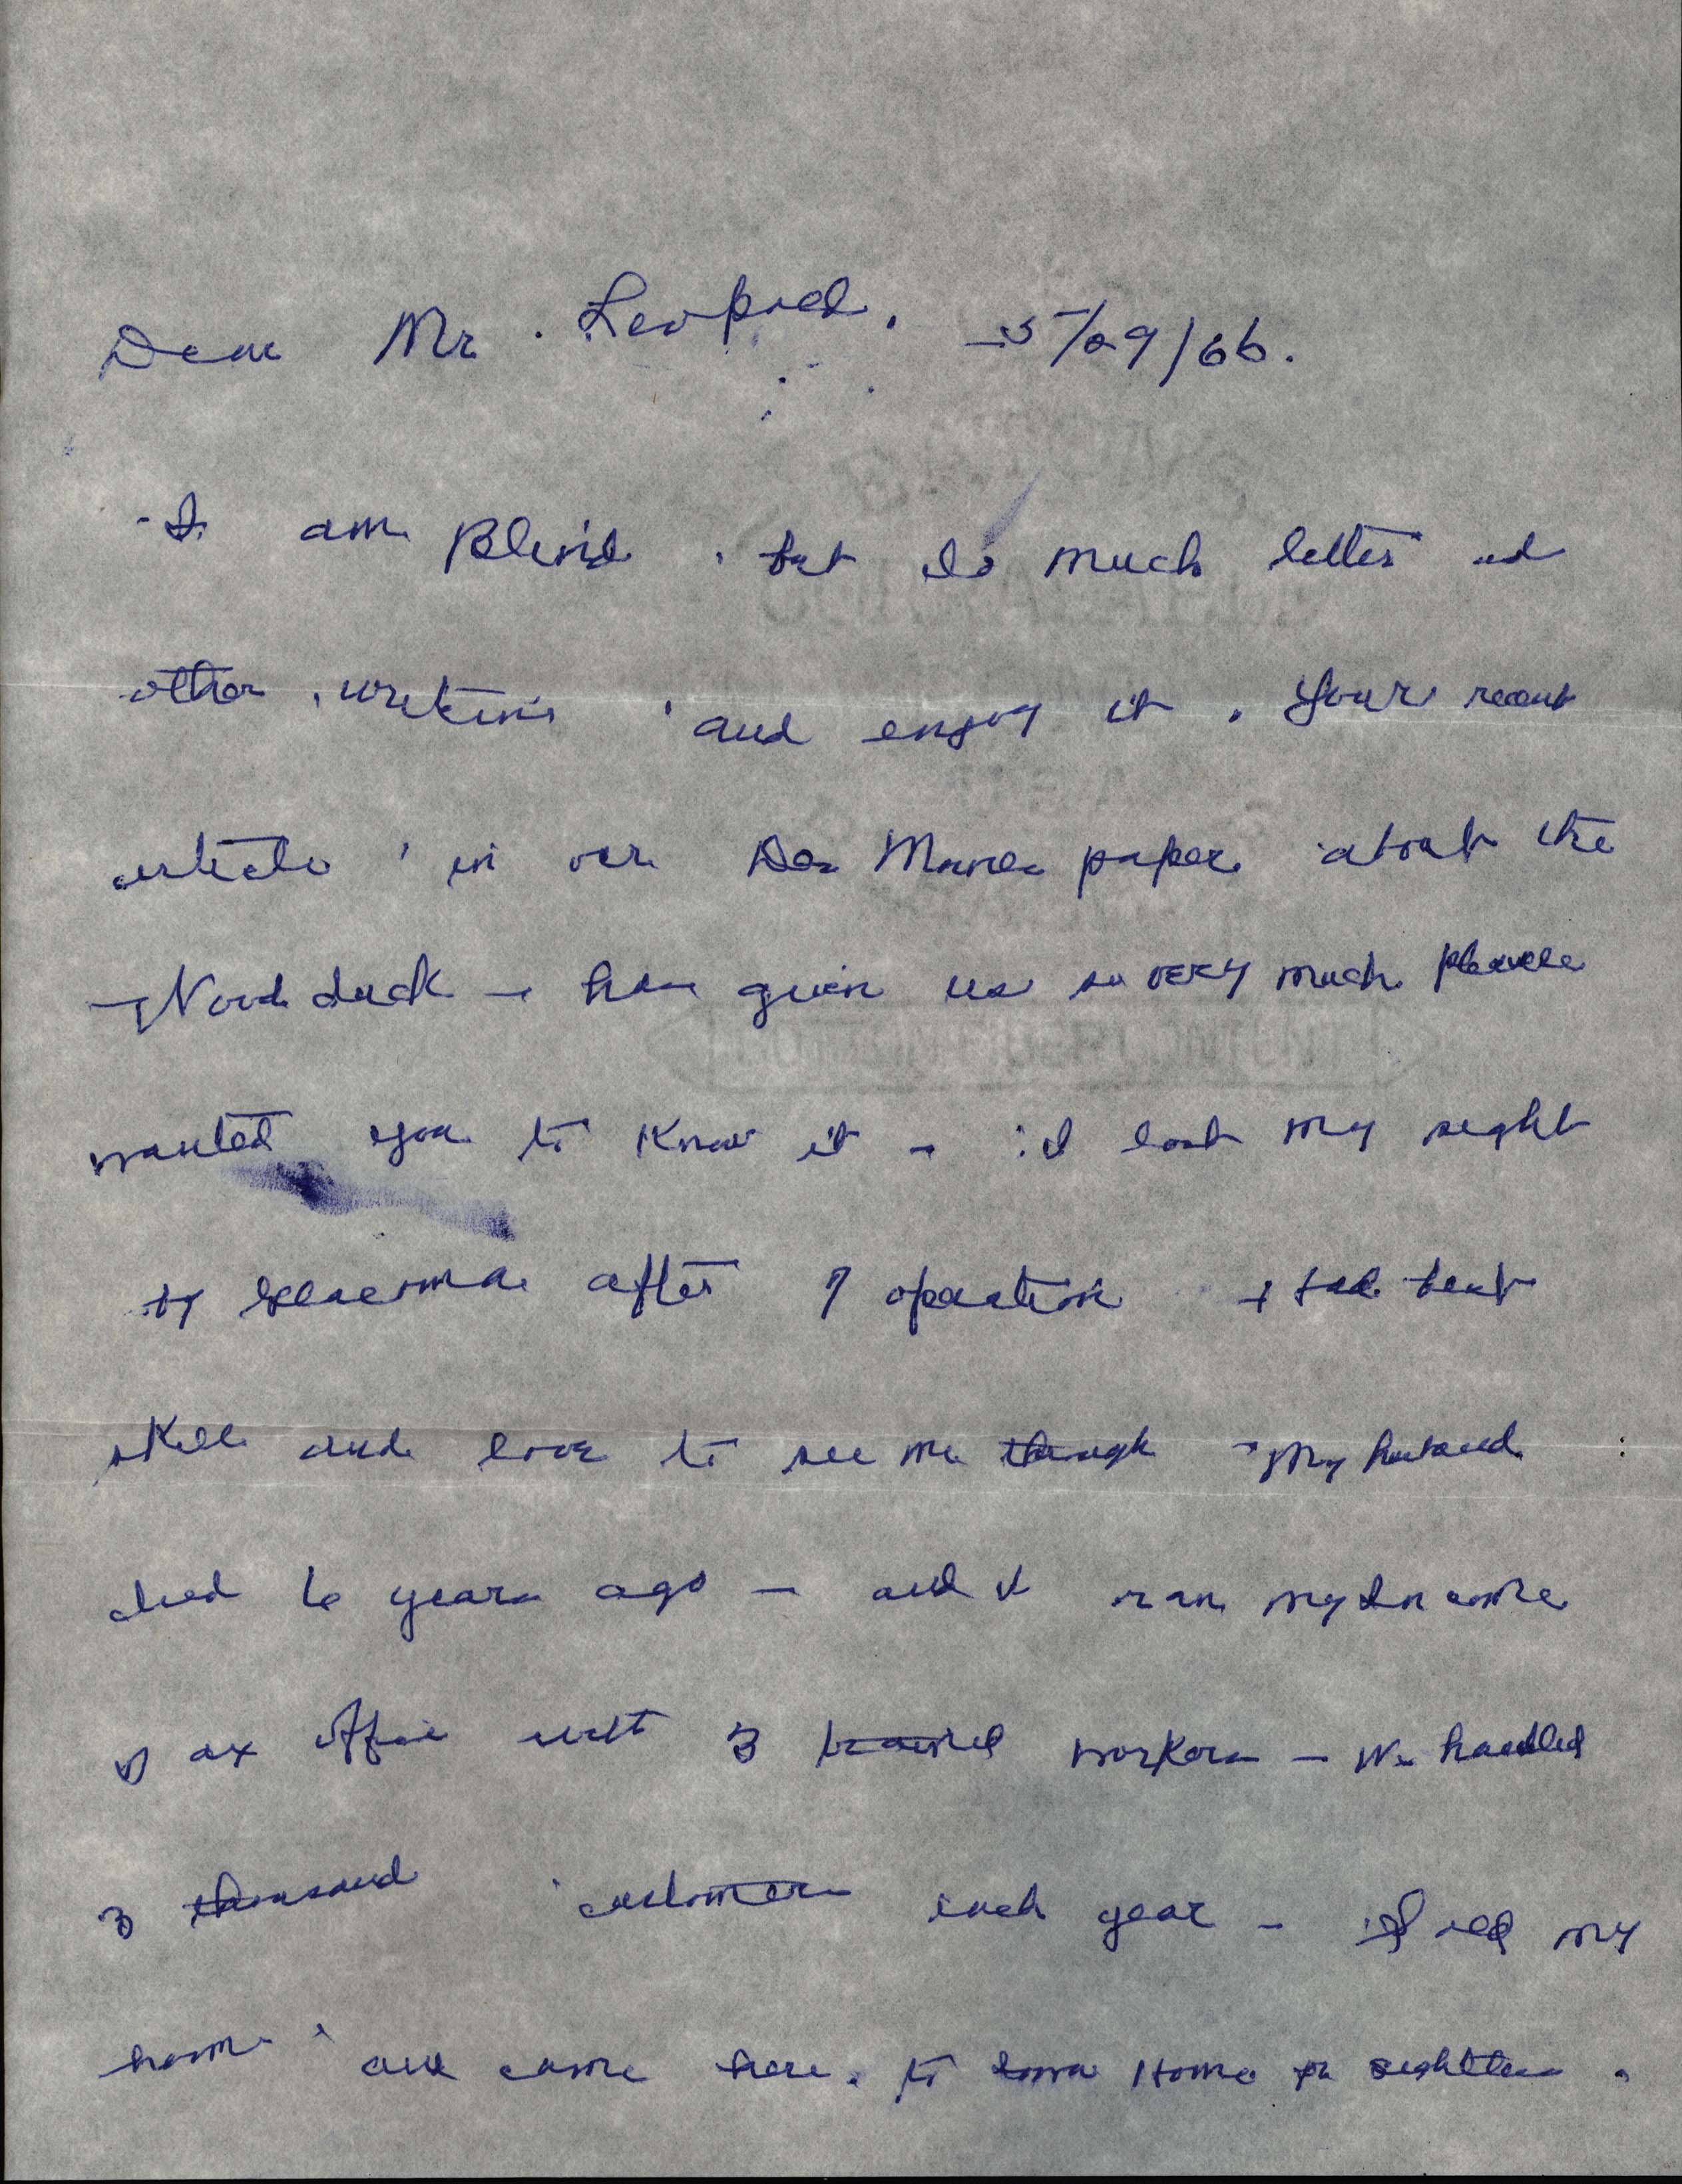 Sue L. Schroder letter to Frederic Leopold regarding Wood Ducks, May 29, 1966